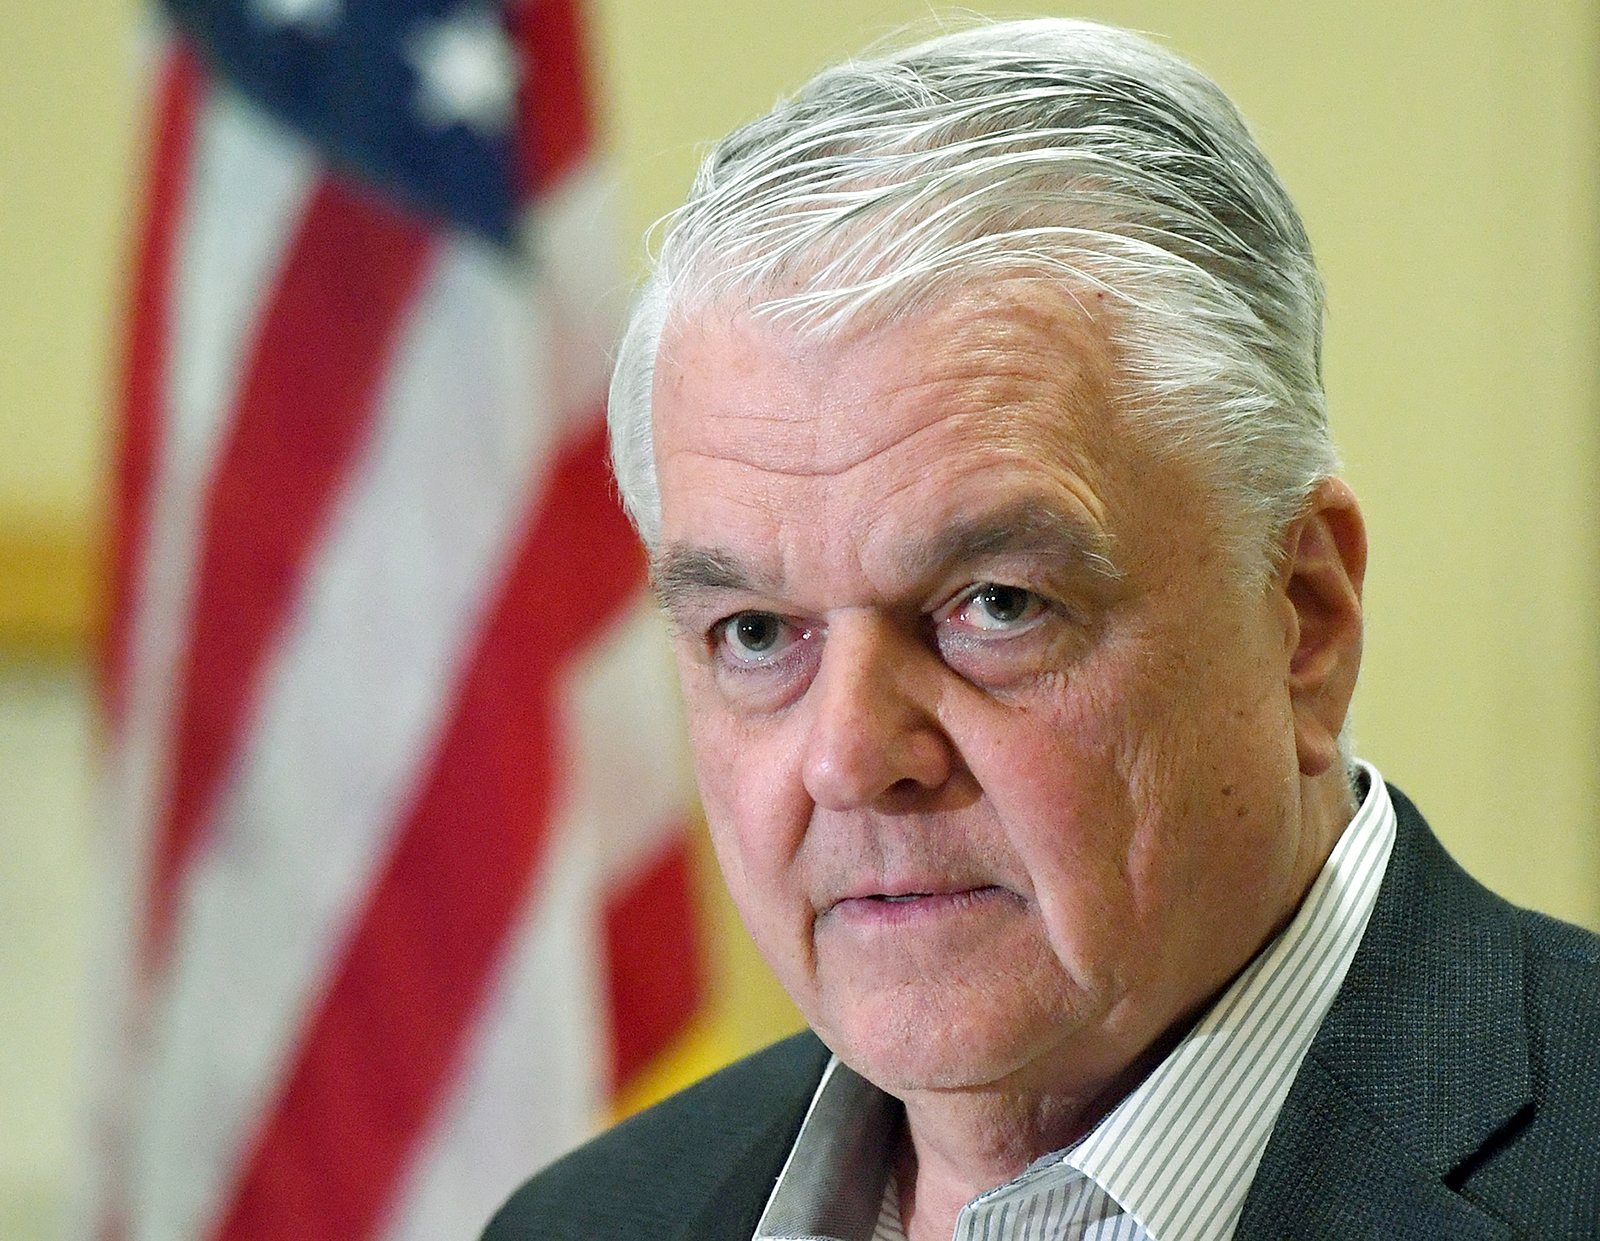 Nevada Gov. Steve Sisolak speaks during a news conference on the state's response to the coronavirus outbreak at the Grant Sawyer State Office Building in Las Vegas, Nevada on March 17. 